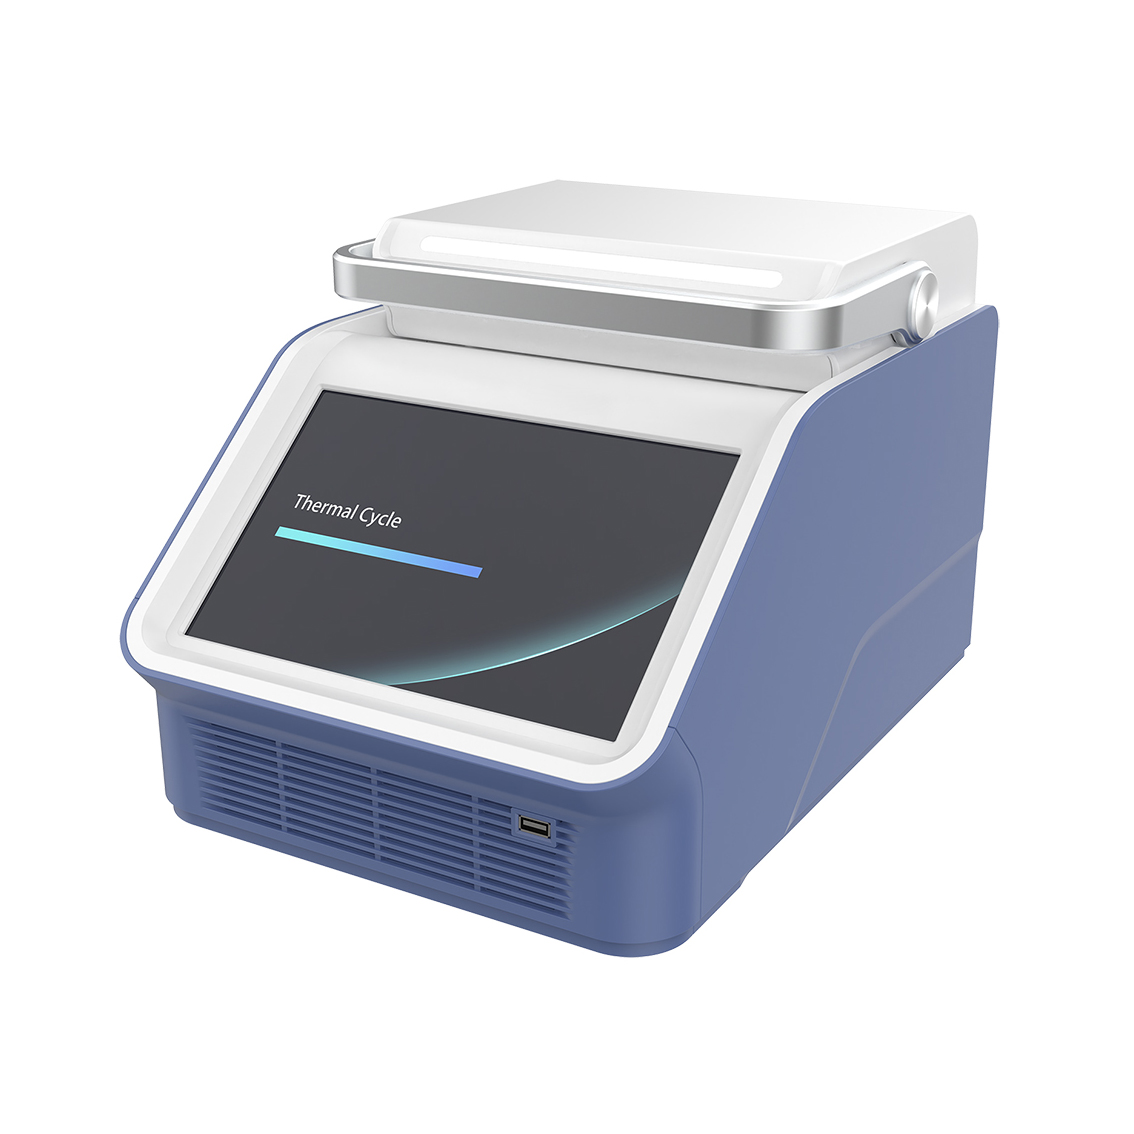 AMAIN Portable Thermal Cycler AMPURE-A384 Automated Repure Thermal Cycler Machine Real Time PCR Thermal Cycler